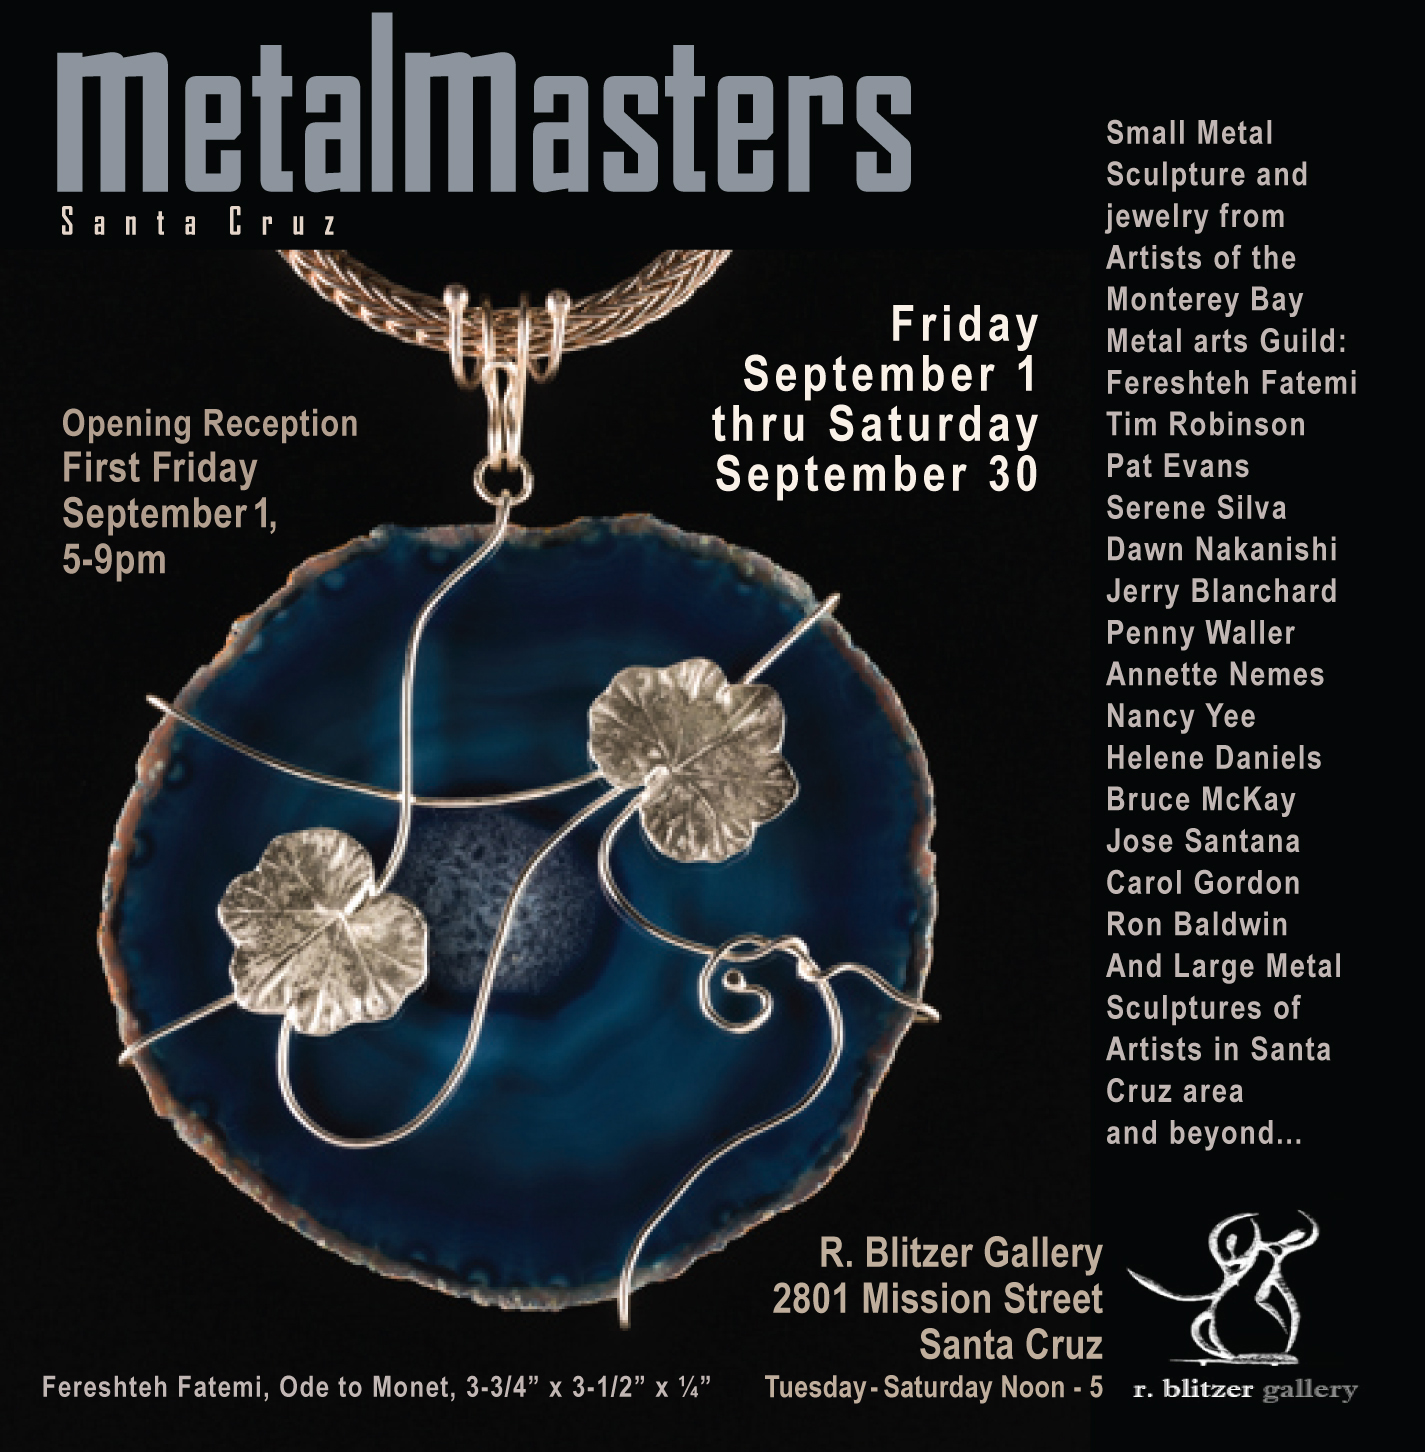 details of the artists who will be exhibiting in the small metals sculpture show at Blitzer Gallery